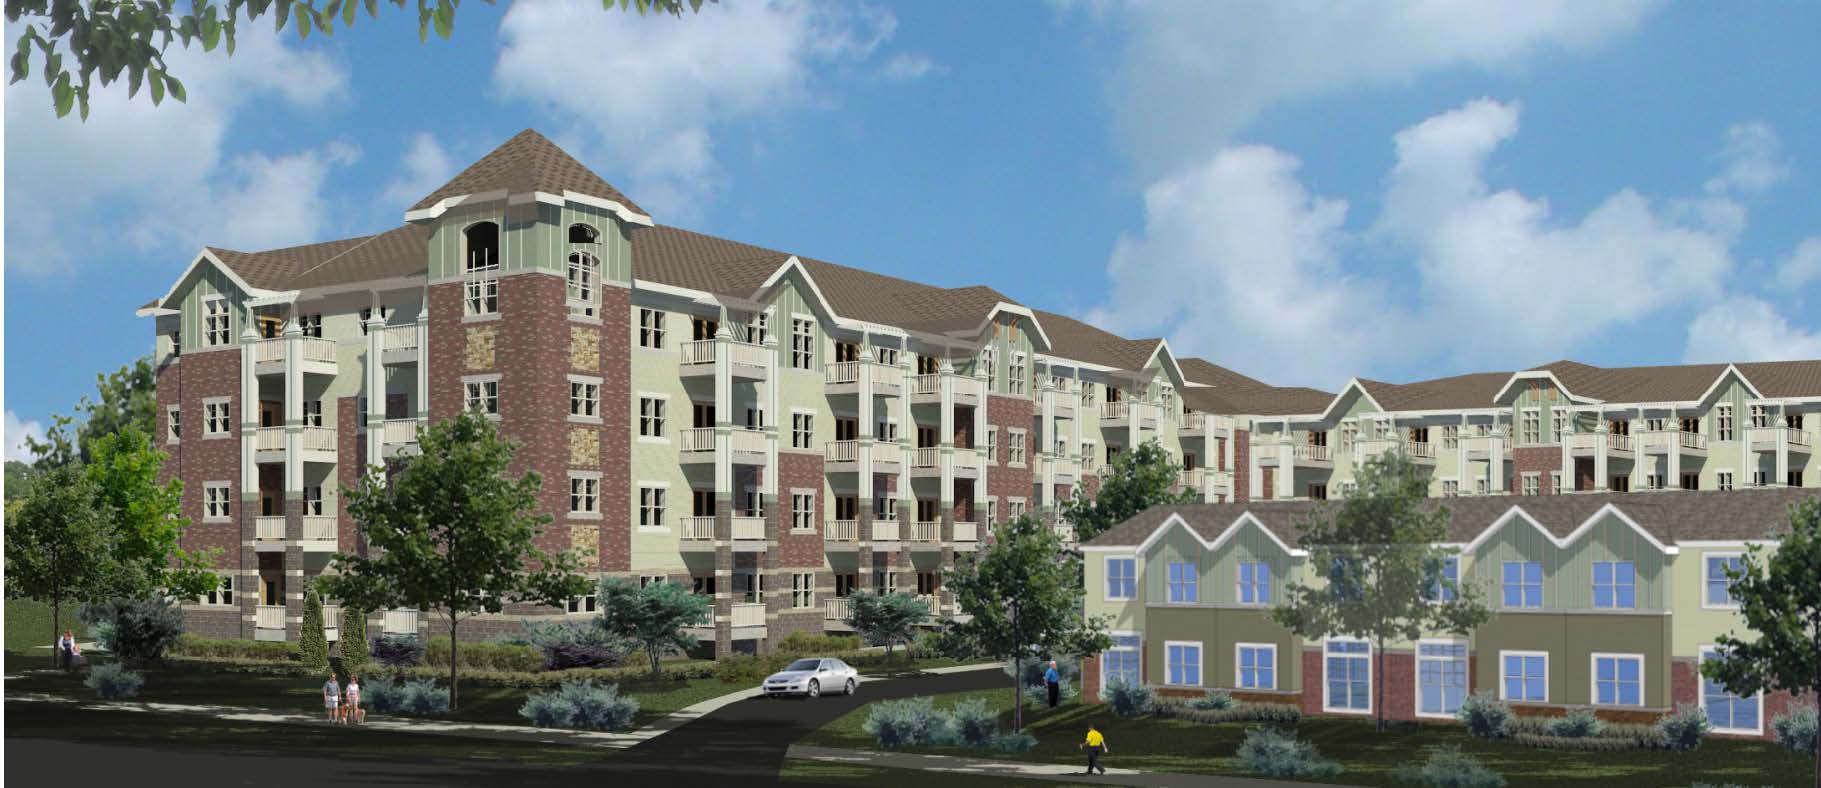 Wauwatosa officials grant early approval to senior housing project